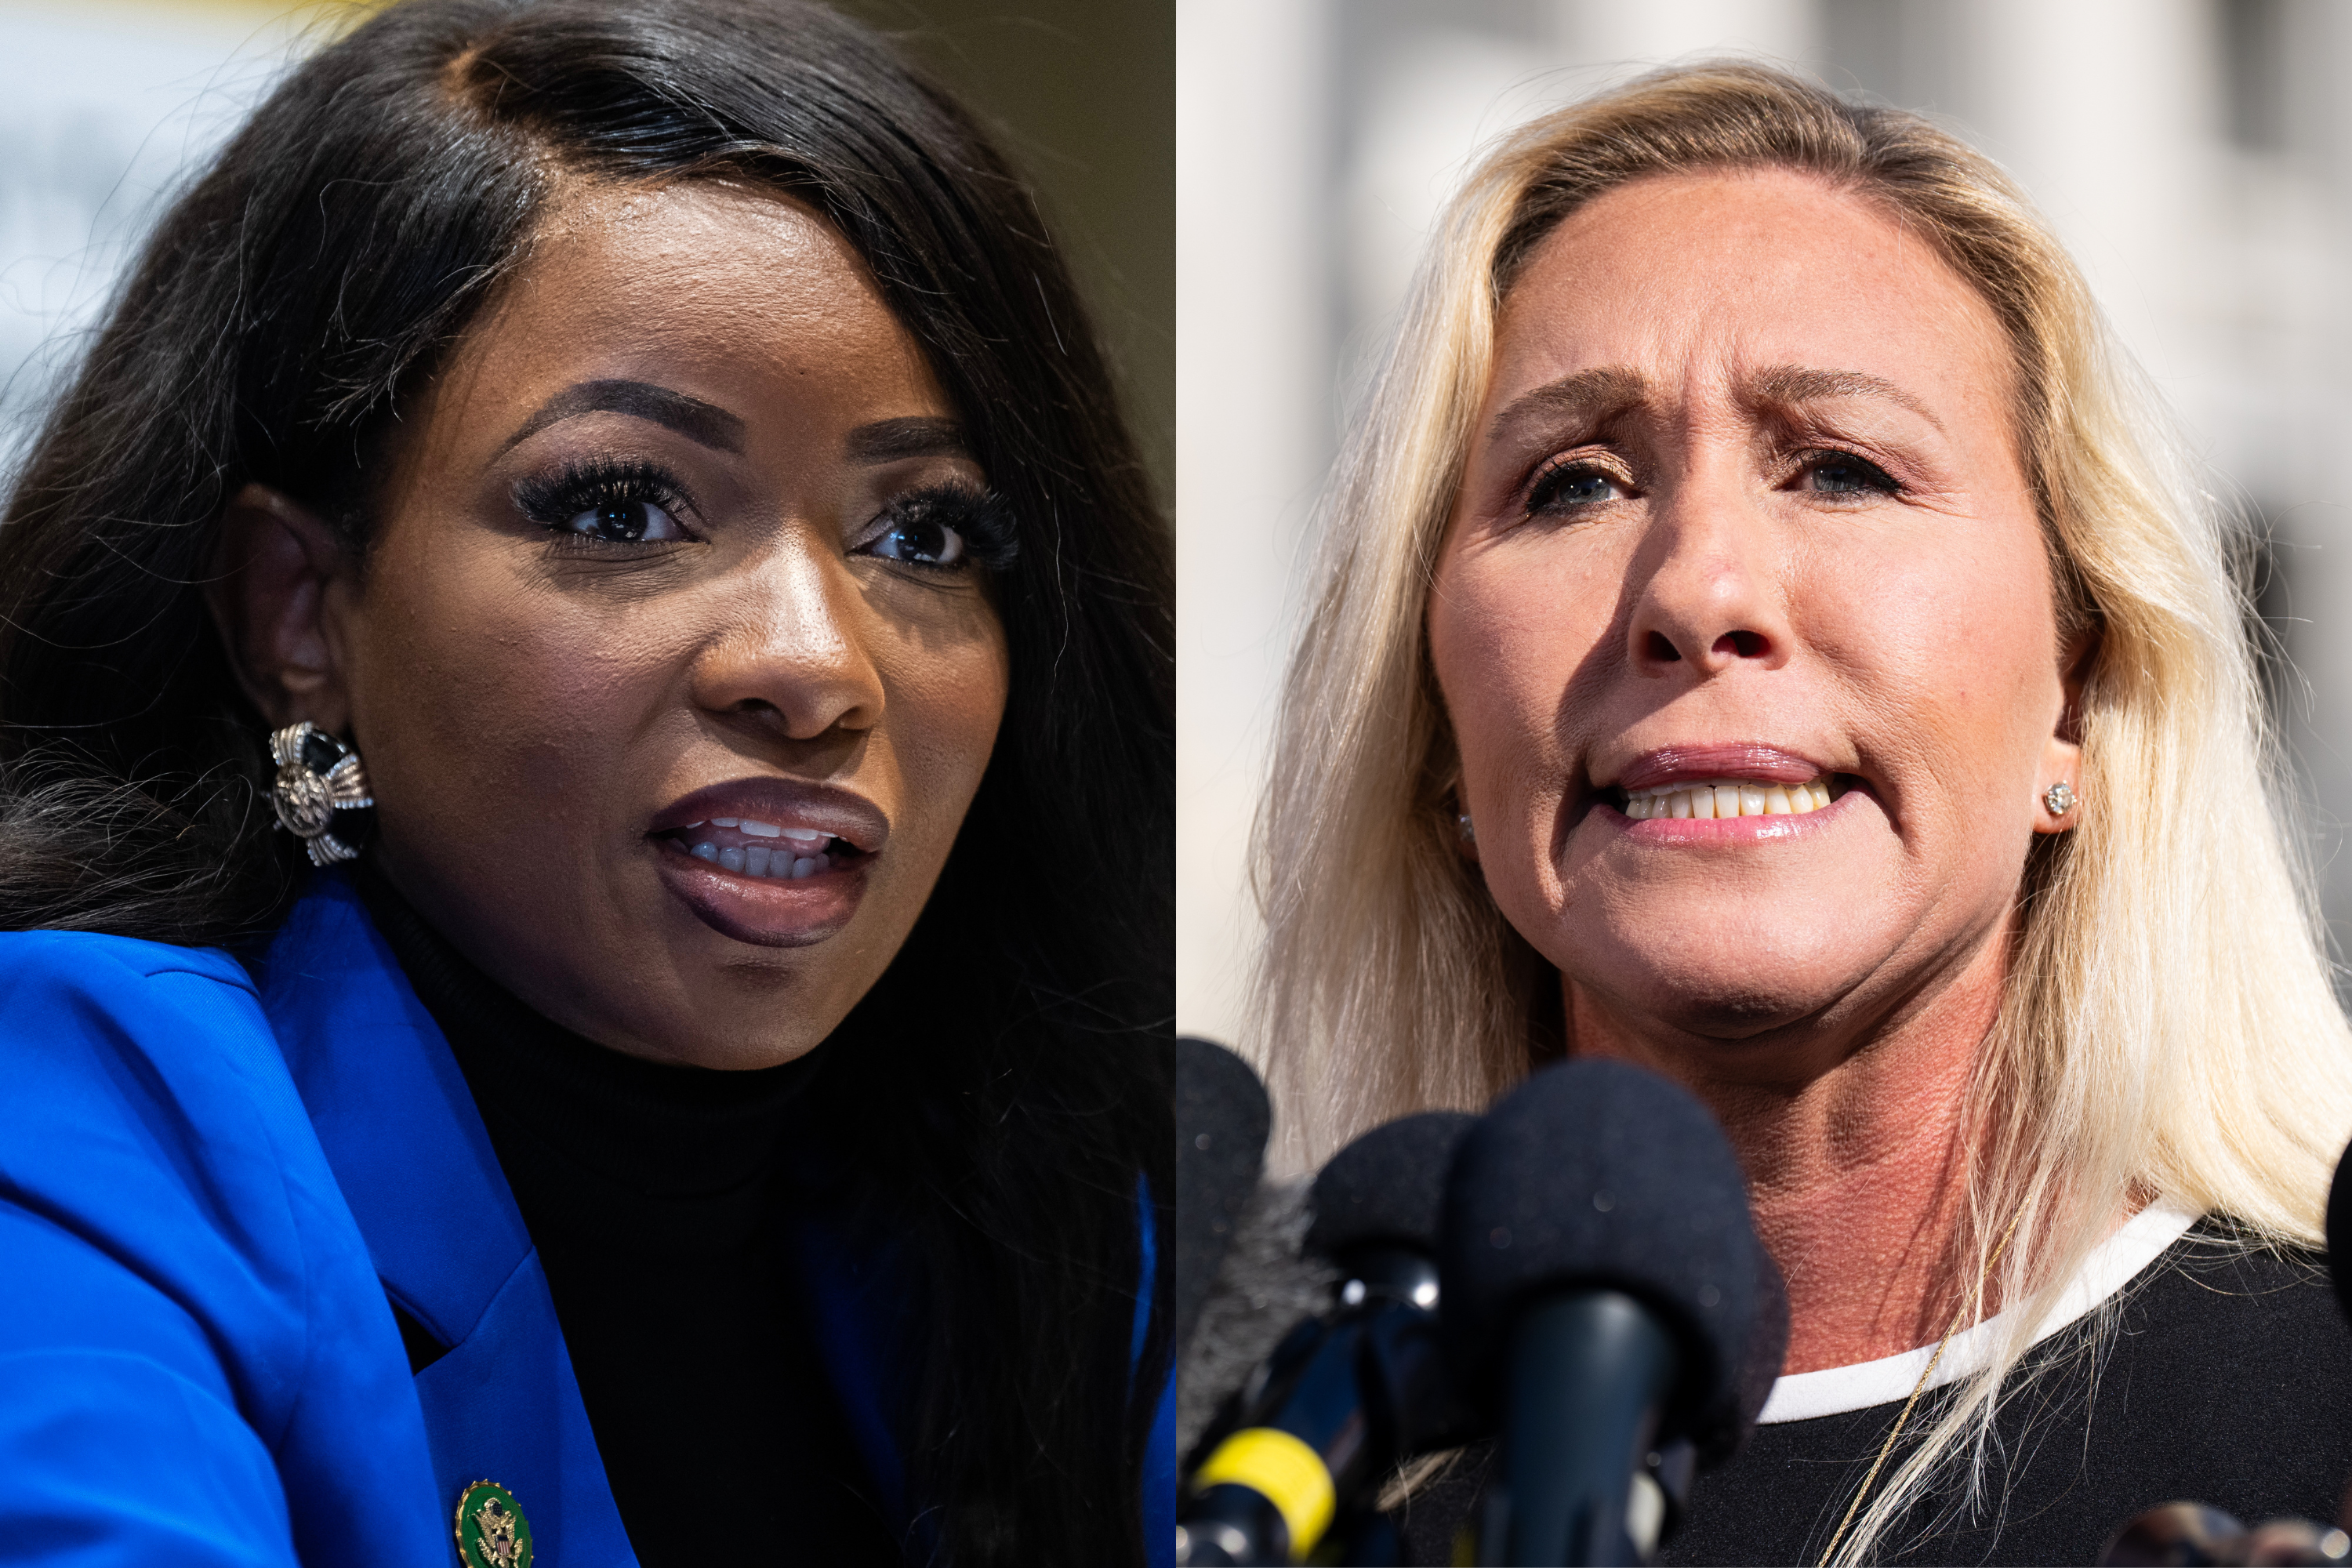 Who is Jasmine Crockett? Texas Democrat goes head-to-head with Rep. Marjorie Taylor Greene during House Oversight meeting